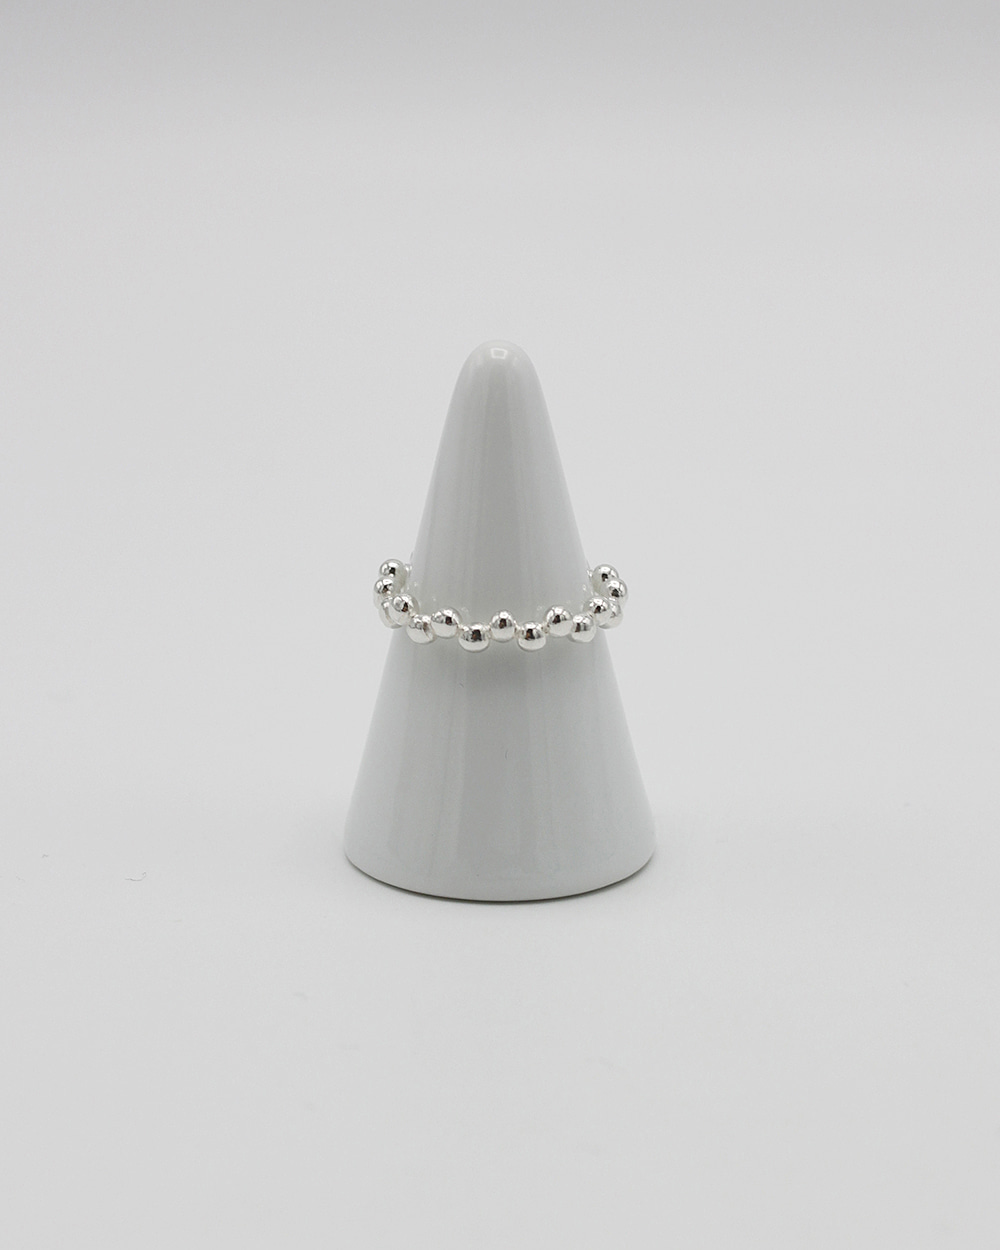 ZIGZAG BALL RING - SILVER